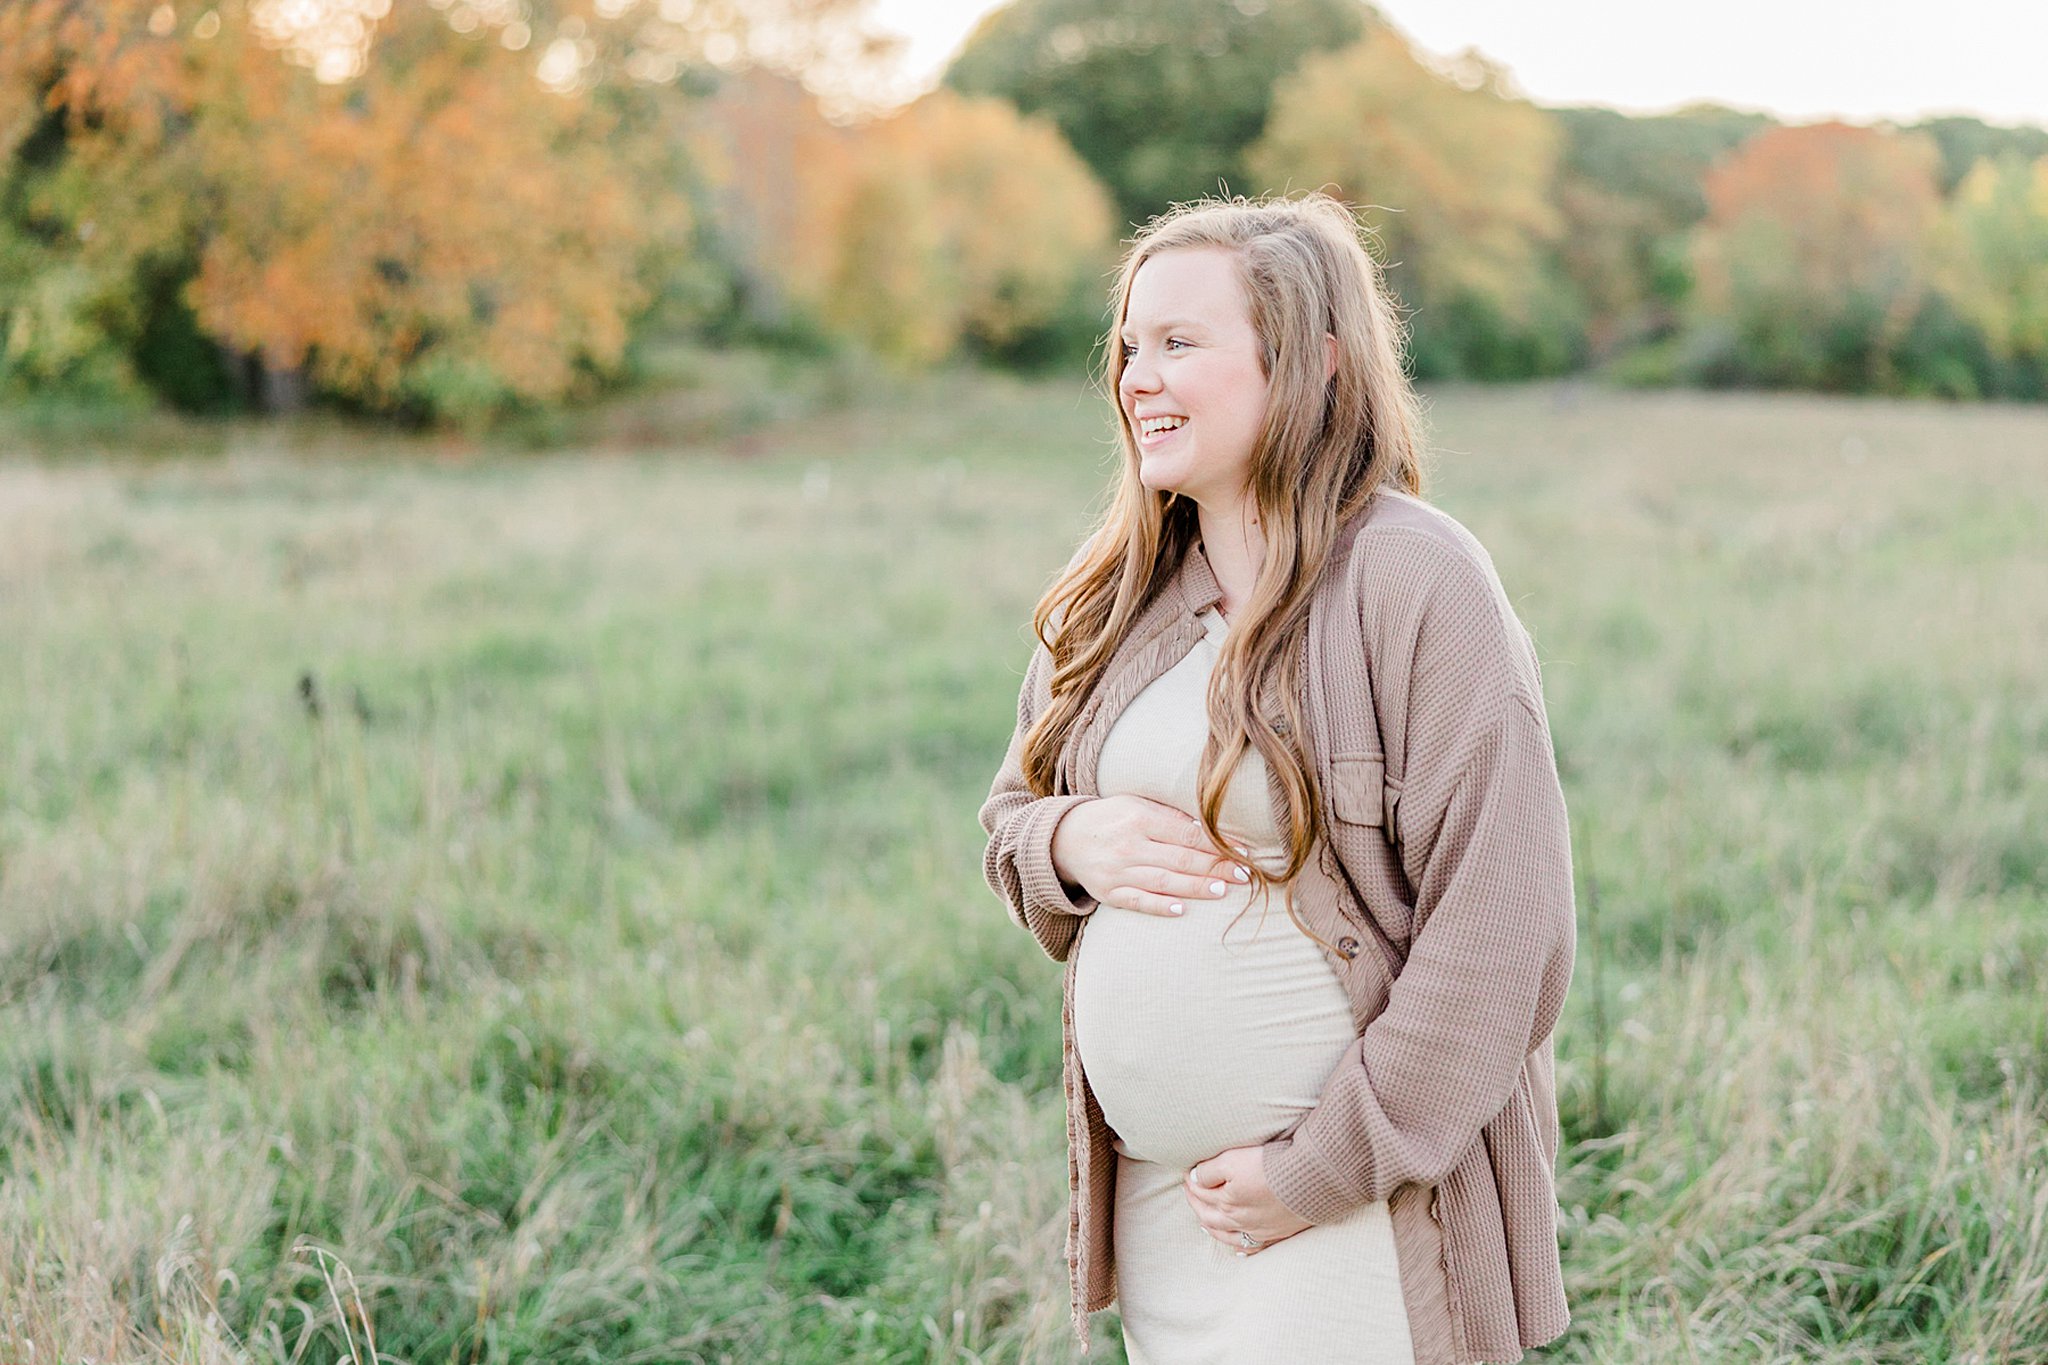 A mother to be in a beige dress and tan sweater holds her bump while standing in a green grassy field prenatal chiropractor